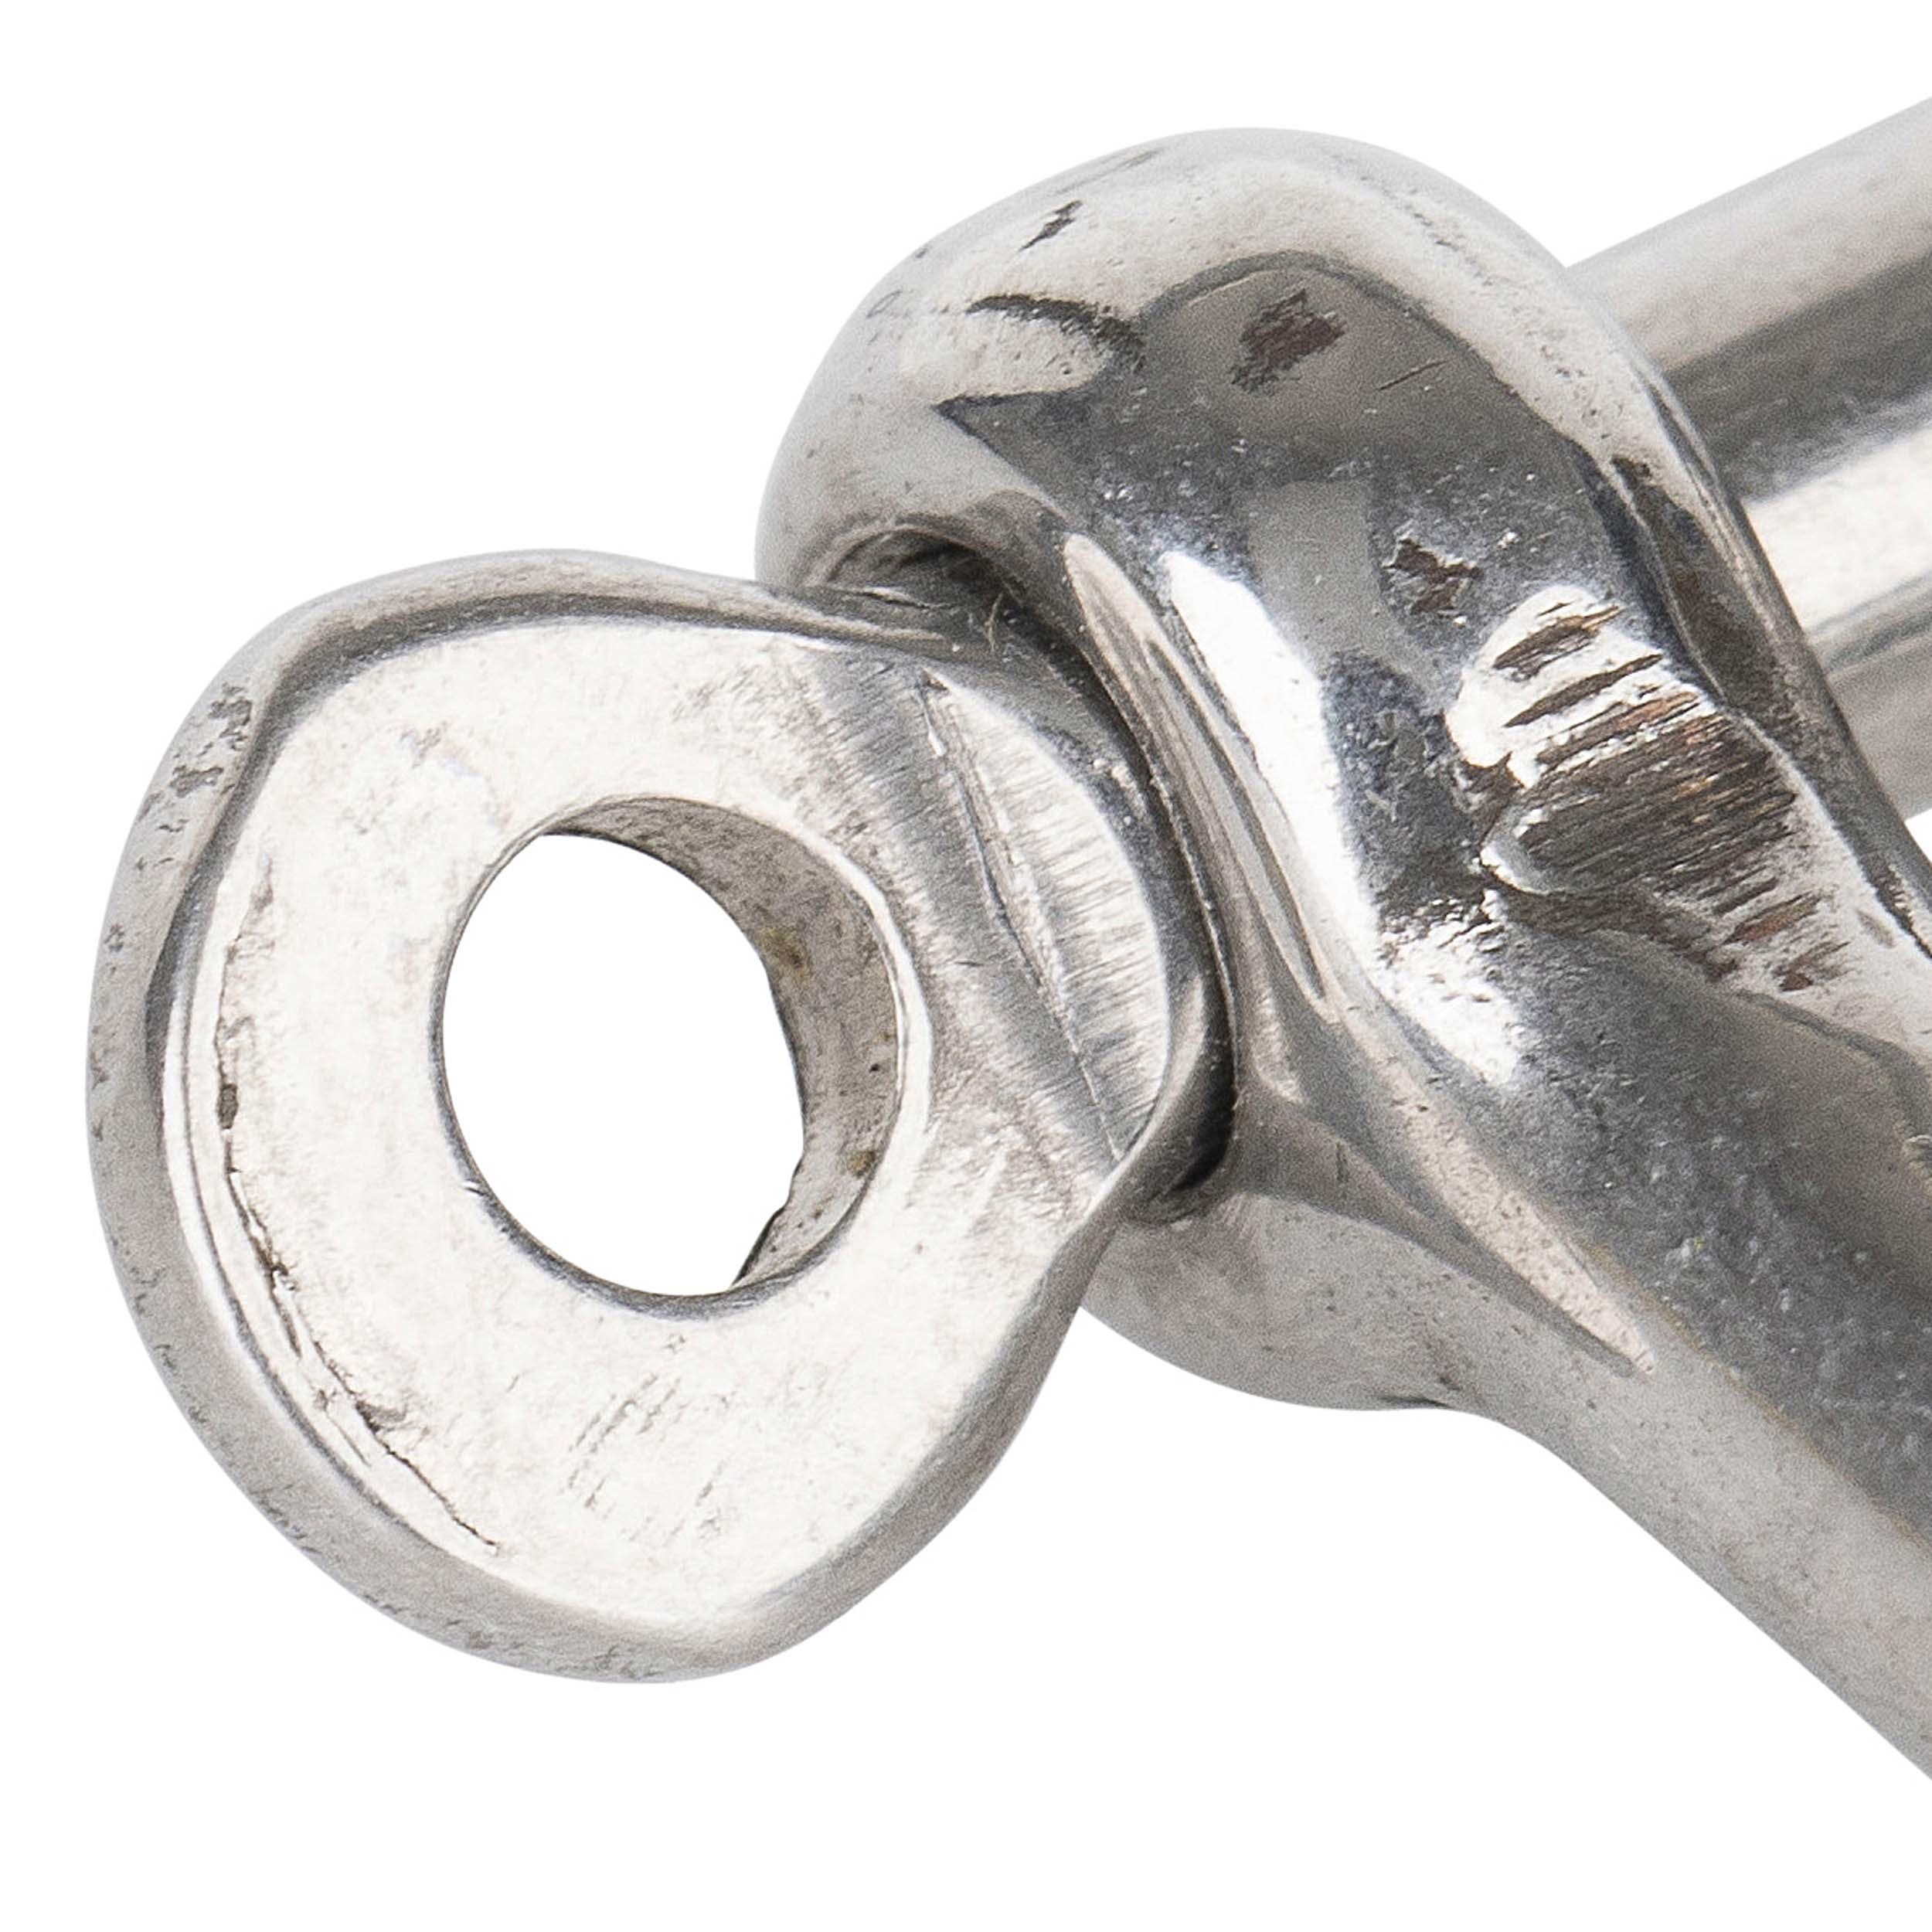 6 mm stainless steel straight captive pin sailing shackle 4/4